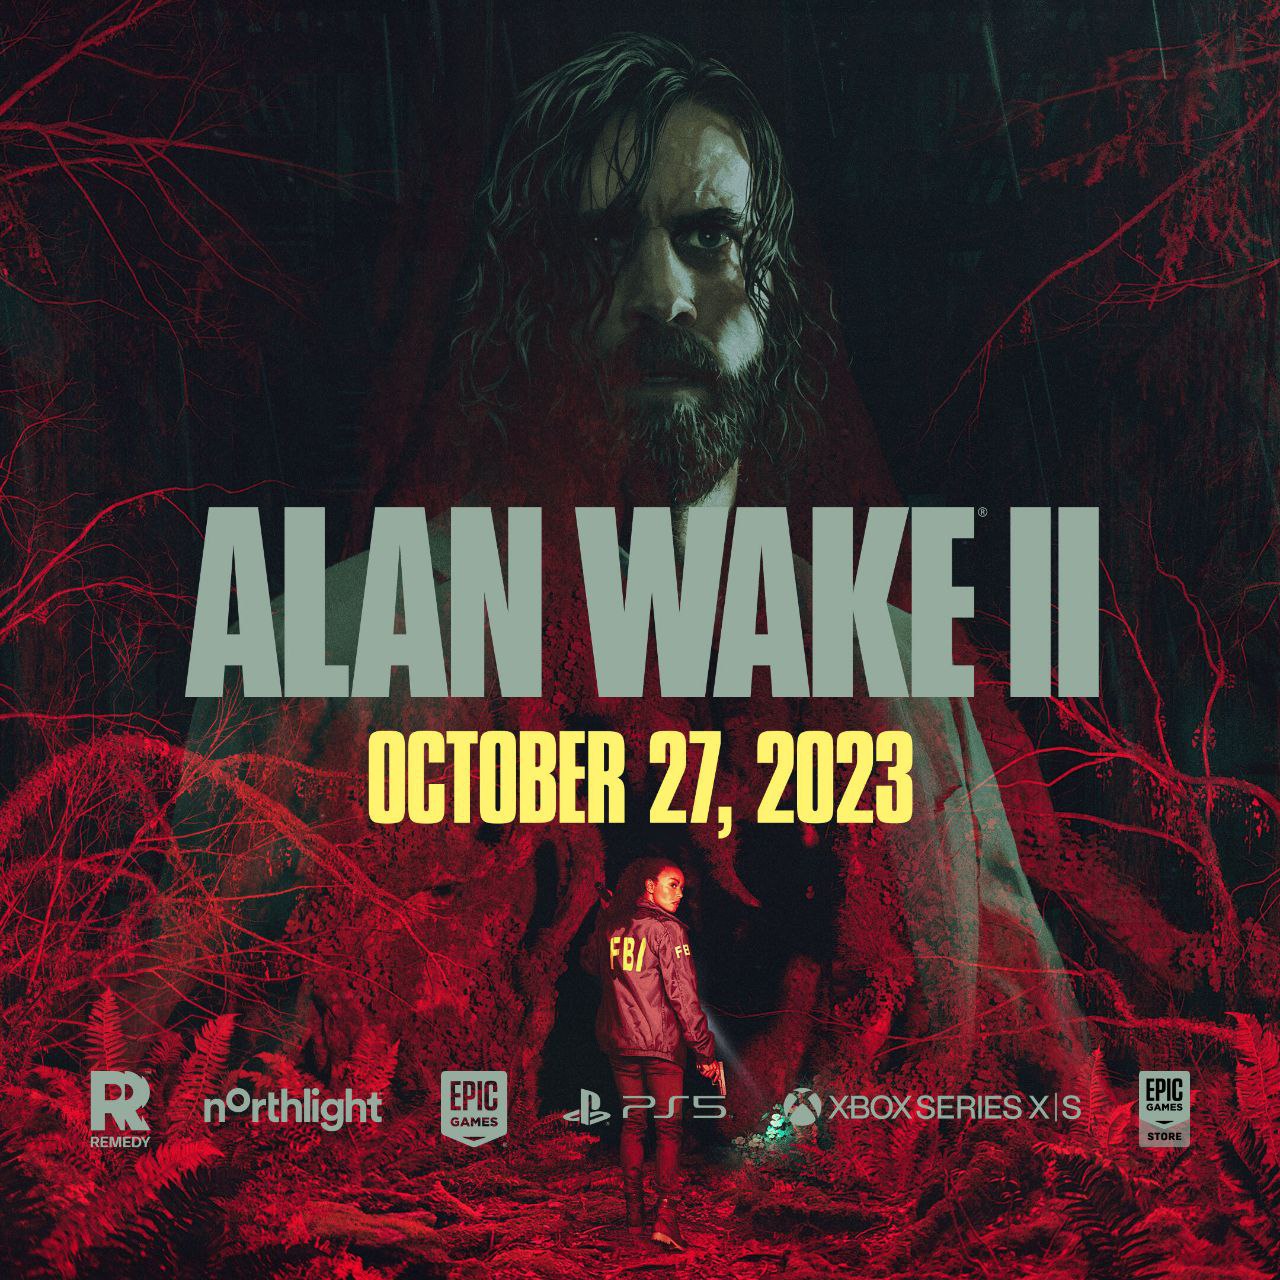 ALAN WAKE 2 DELUX❤Epic Games❤GAME PACK for Steam Deck